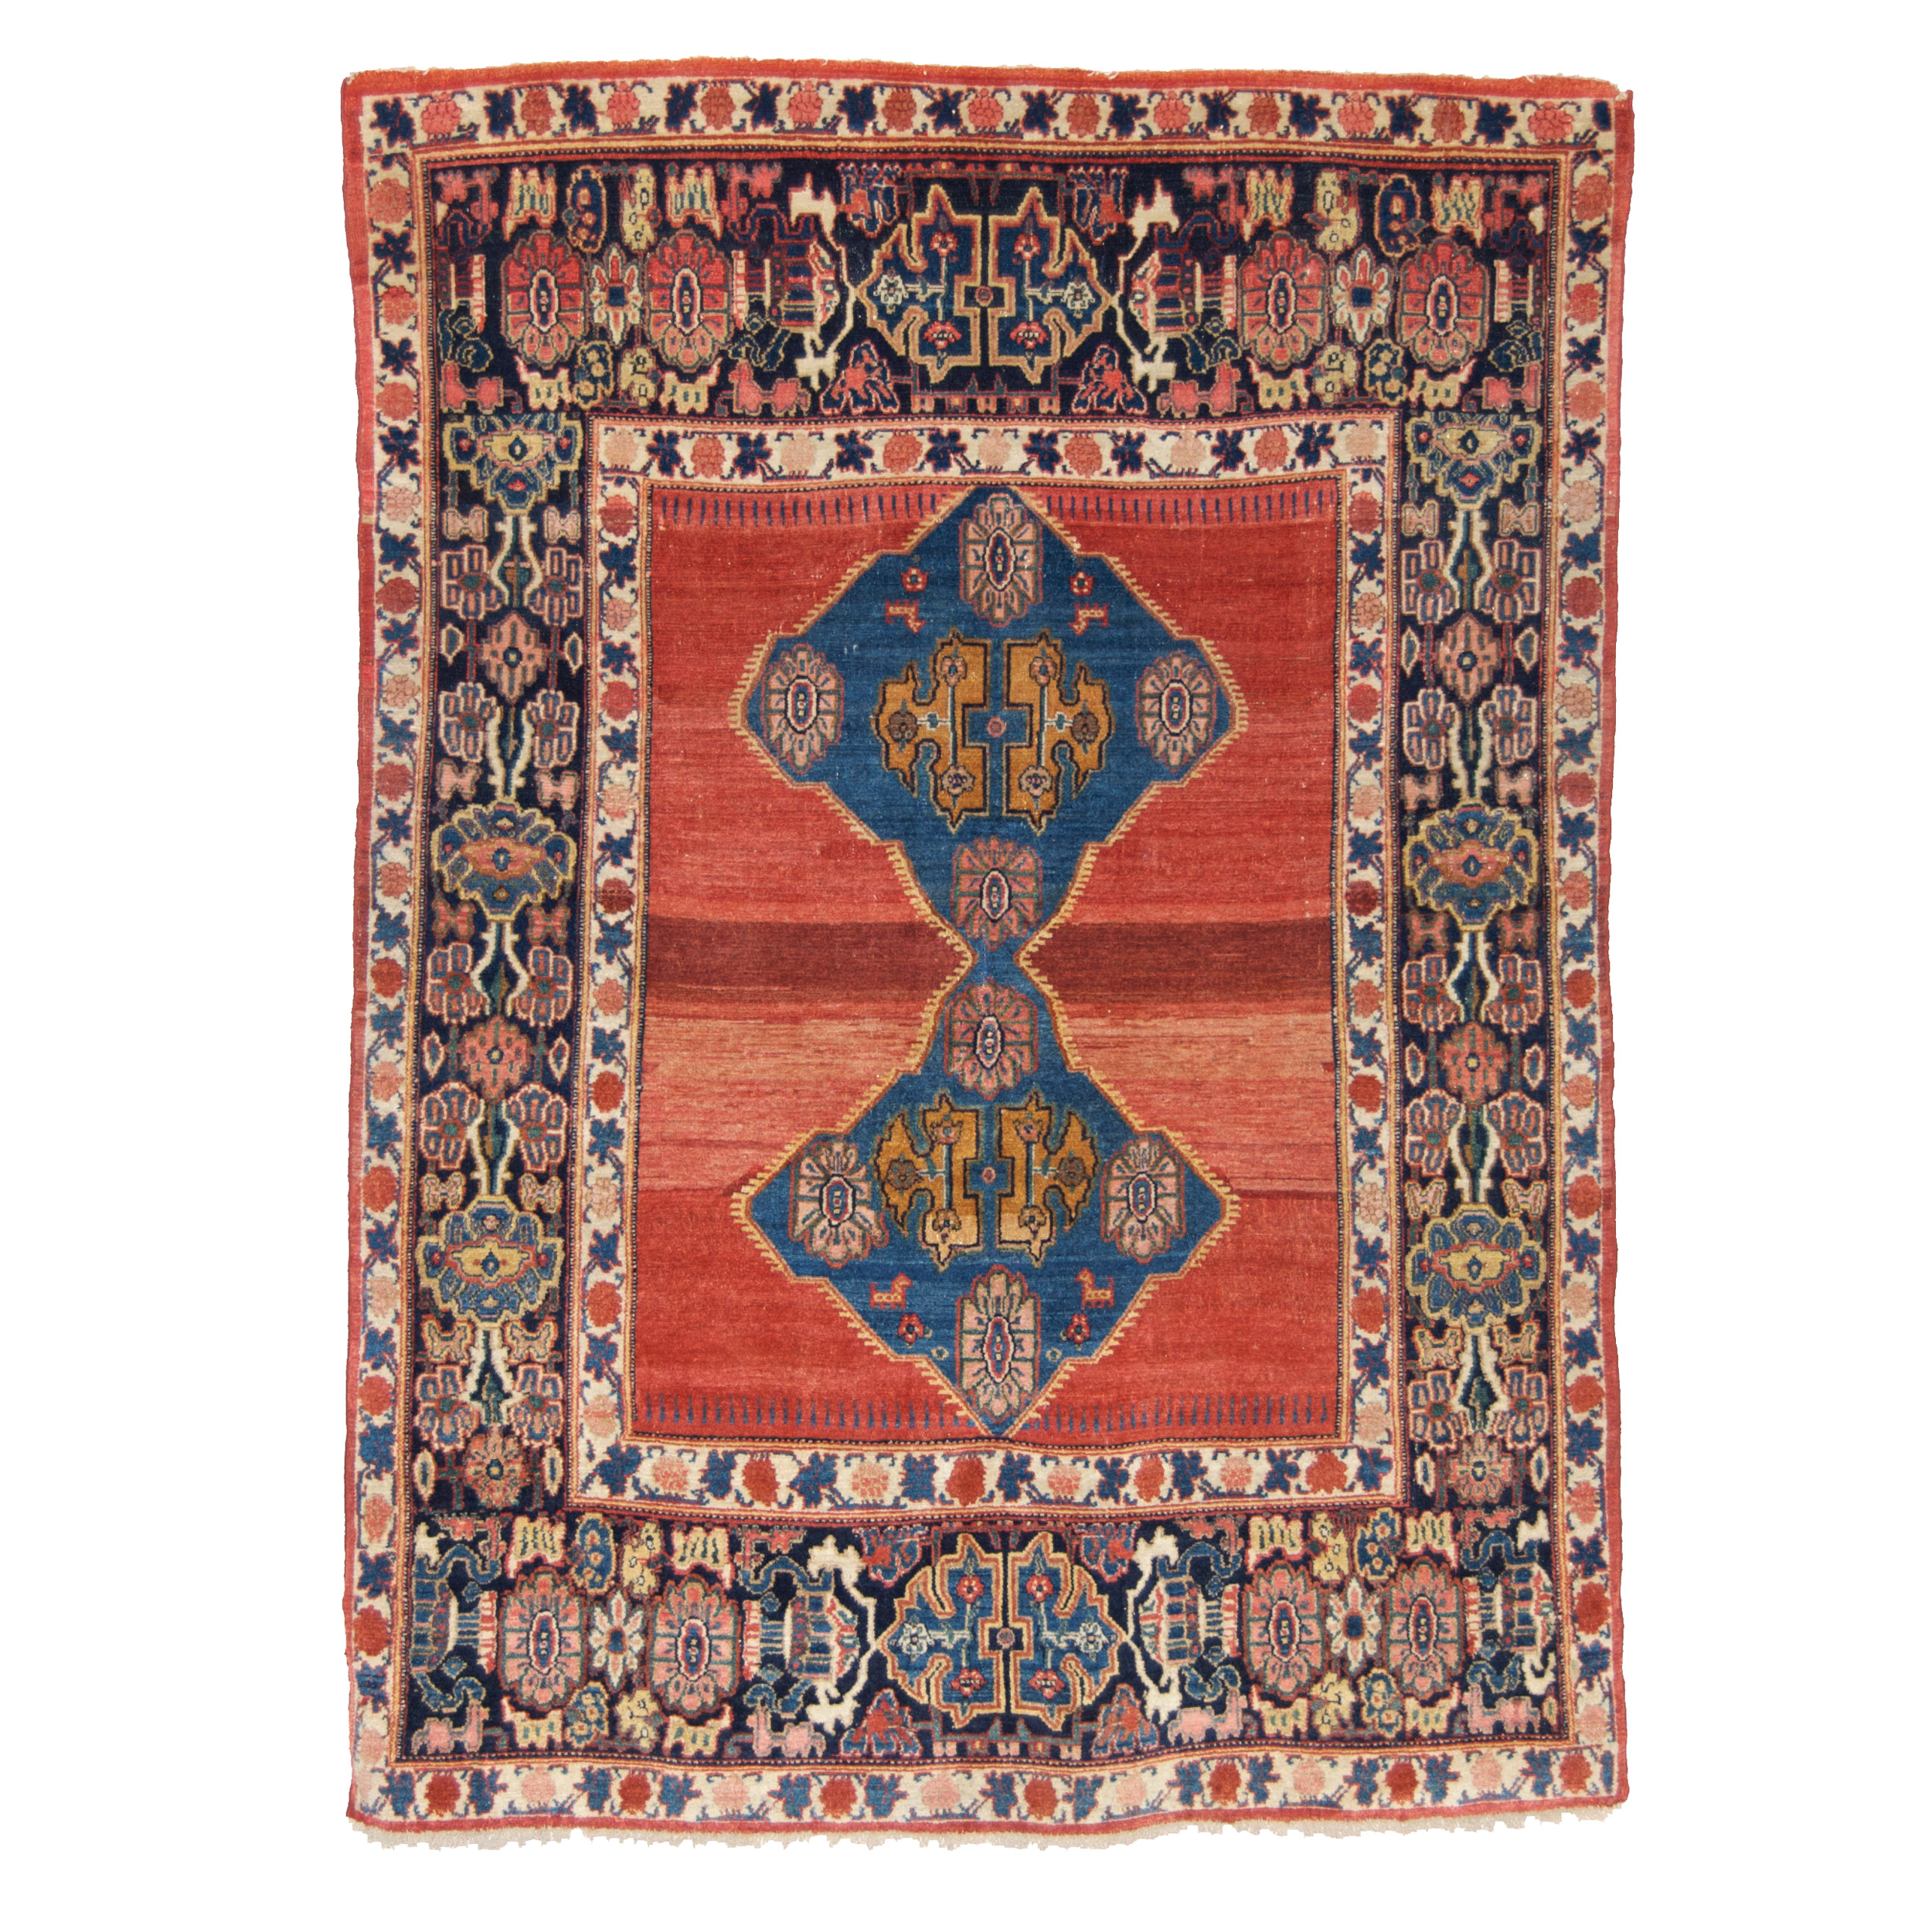 Antique Persian Senneh rug with open field design, Douglas Stock Gallery Antique Rug Research Archives, antique rugs Boston,MA area